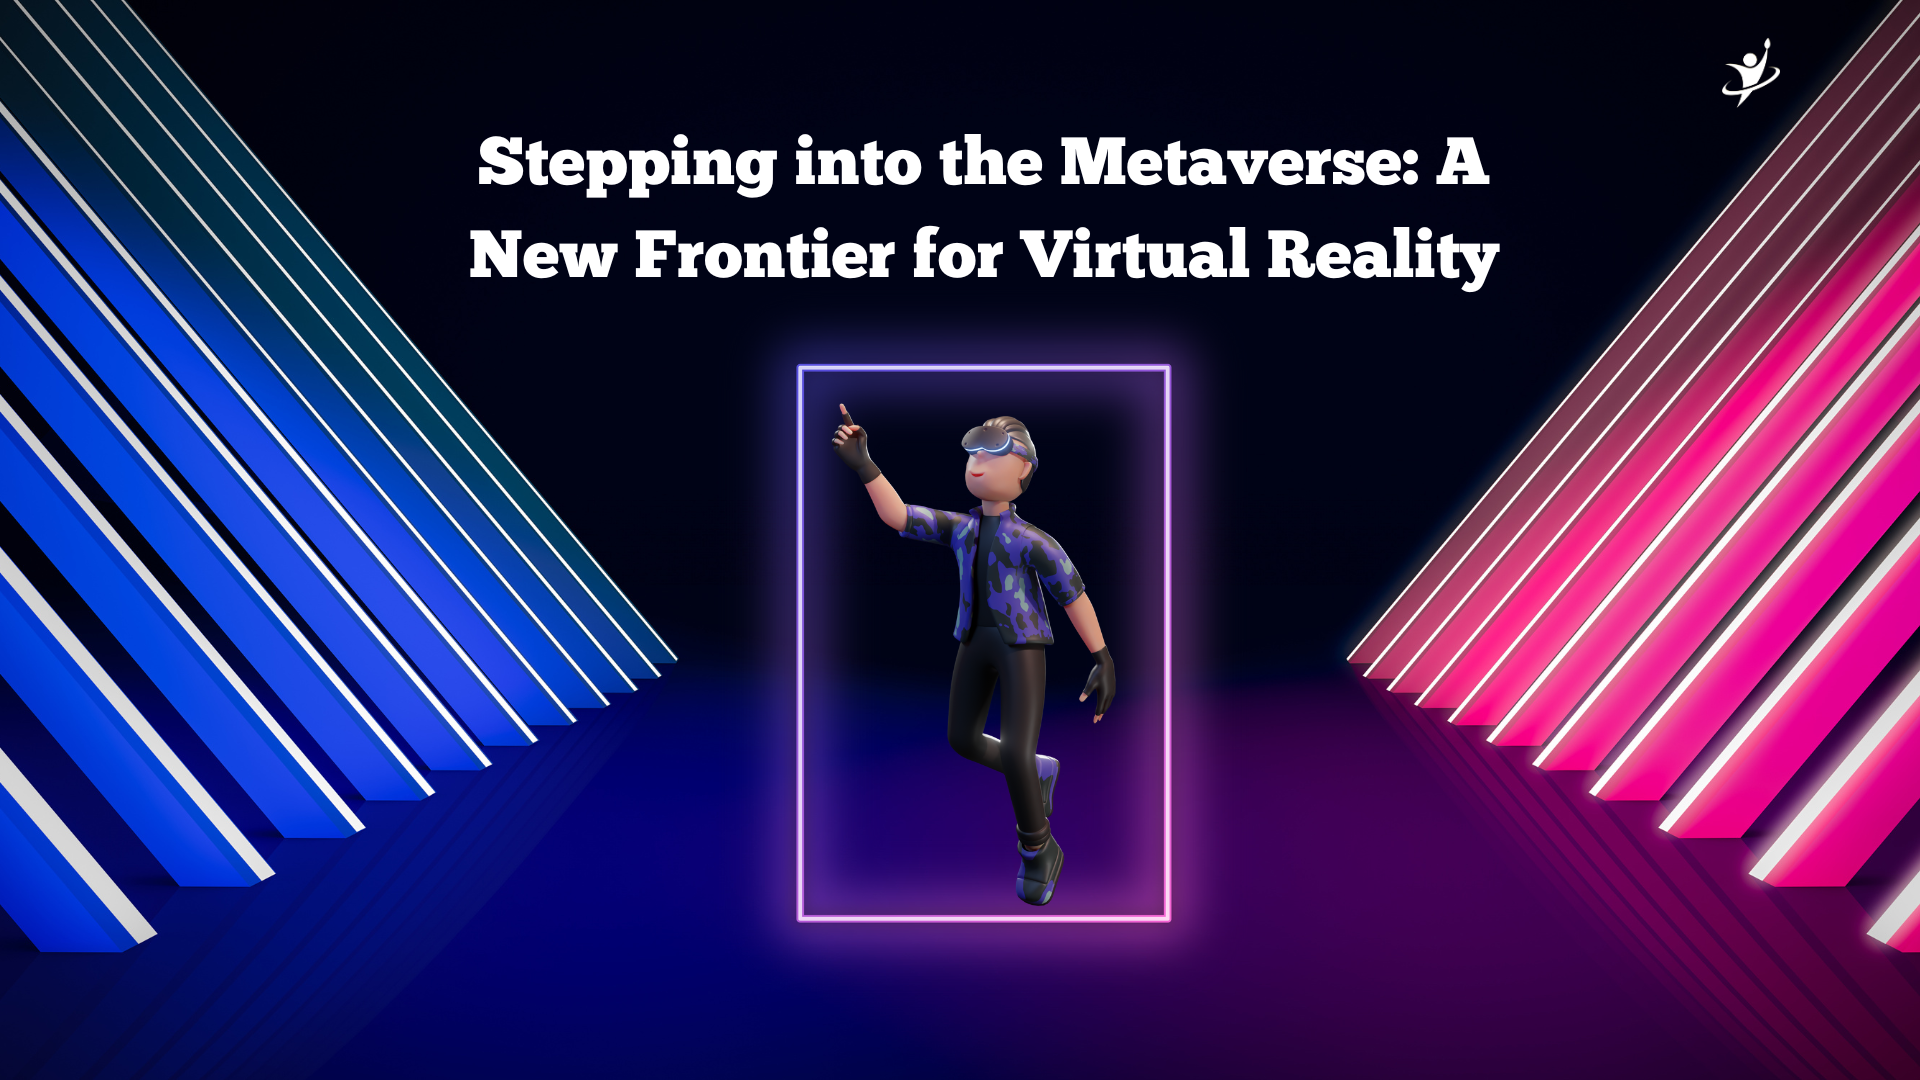 Stepping into the Metaverse